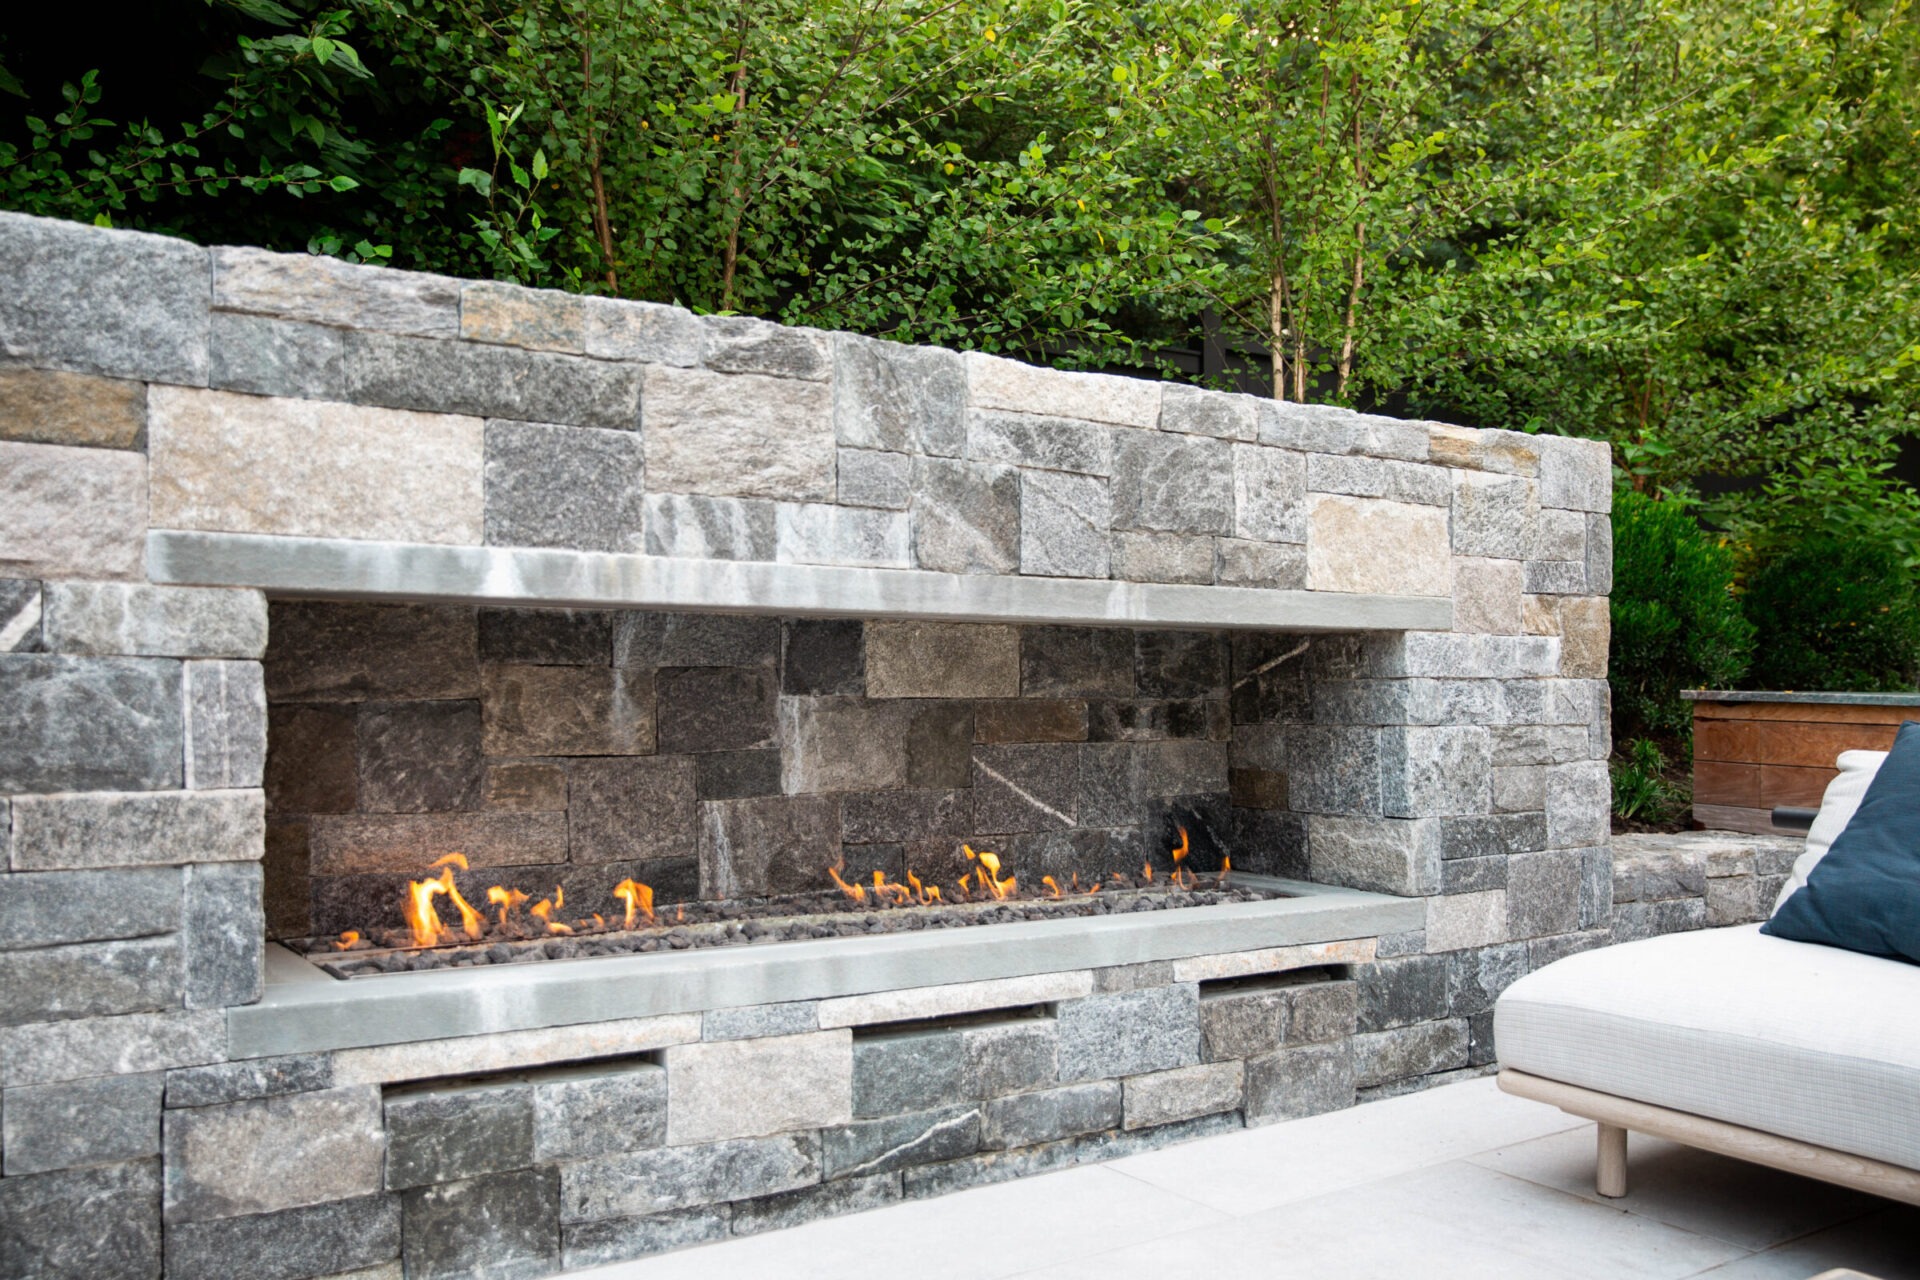 An outdoor gas fireplace with a stone surround. Flames burn over a metal ledge. A cushioned outdoor chaise lounge sits nearby, surrounded by greenery.